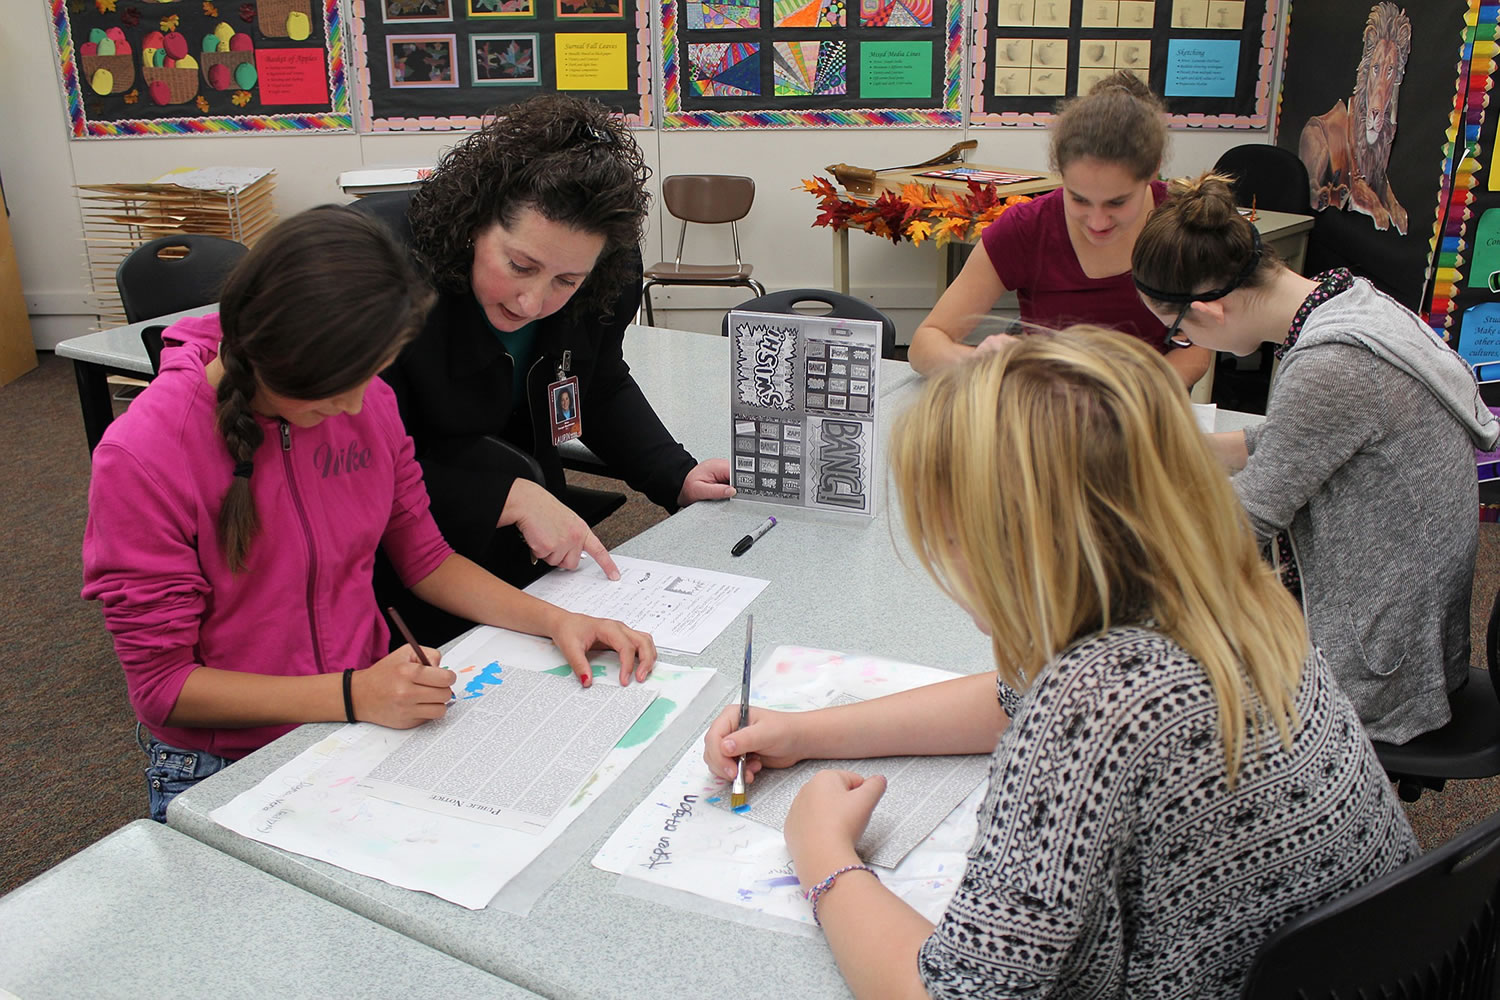 Brush Prairie: Laurin Middle School art teacher Tanya Bachman, who was recently awarded &quot;Middle Level Educator of the Year&quot; from the Washington Art Education Association, helps students with an art project.